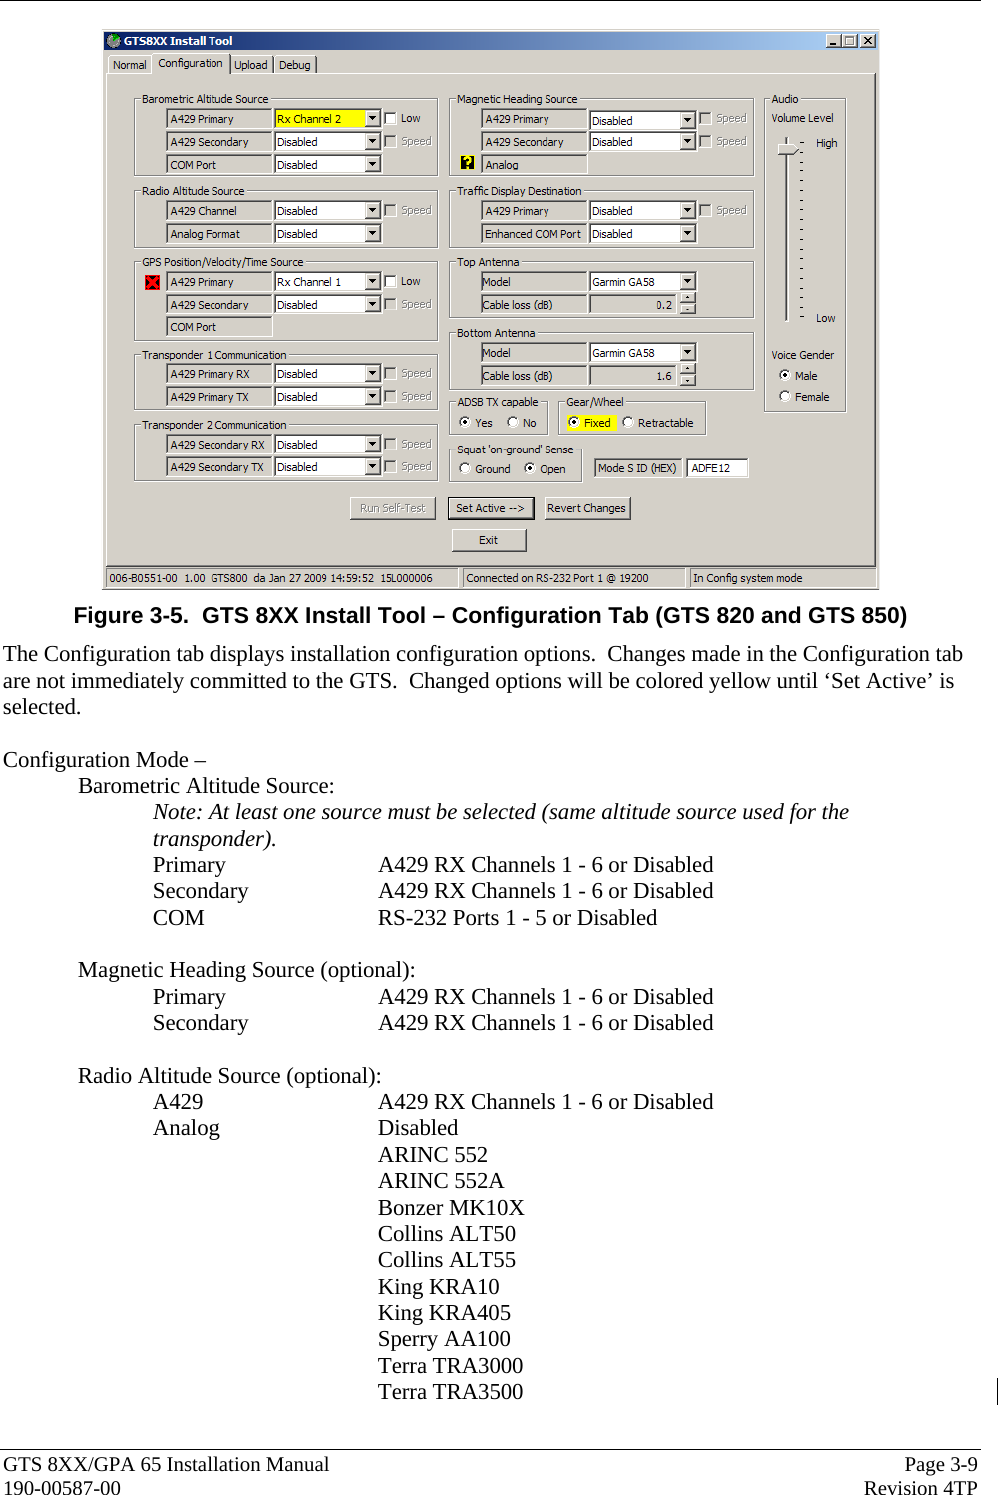  GTS 8XX/GPA 65 Installation Manual  Page 3-9 190-00587-00  Revision 4TP  Figure 3-5.  GTS 8XX Install Tool – Configuration Tab (GTS 820 and GTS 850) The Configuration tab displays installation configuration options.  Changes made in the Configuration tab are not immediately committed to the GTS.  Changed options will be colored yellow until ‘Set Active’ is selected.  Configuration Mode –   Barometric Altitude Source: Note: At least one source must be selected (same altitude source used for the transponder). Primary     A429 RX Channels 1 - 6 or Disabled Secondary    A429 RX Channels 1 - 6 or Disabled COM      RS-232 Ports 1 - 5 or Disabled  Magnetic Heading Source (optional):  Primary     A429 RX Channels 1 - 6 or Disabled Secondary    A429 RX Channels 1 - 6 or Disabled  Radio Altitude Source (optional):    A429      A429 RX Channels 1 - 6 or Disabled  Analog   Disabled ARINC 552  ARINC 552A  Bonzer MK10X Collins ALT50 Collins ALT55 King KRA10   King KRA405  Sperry AA100 Terra TRA3000 Terra TRA3500  